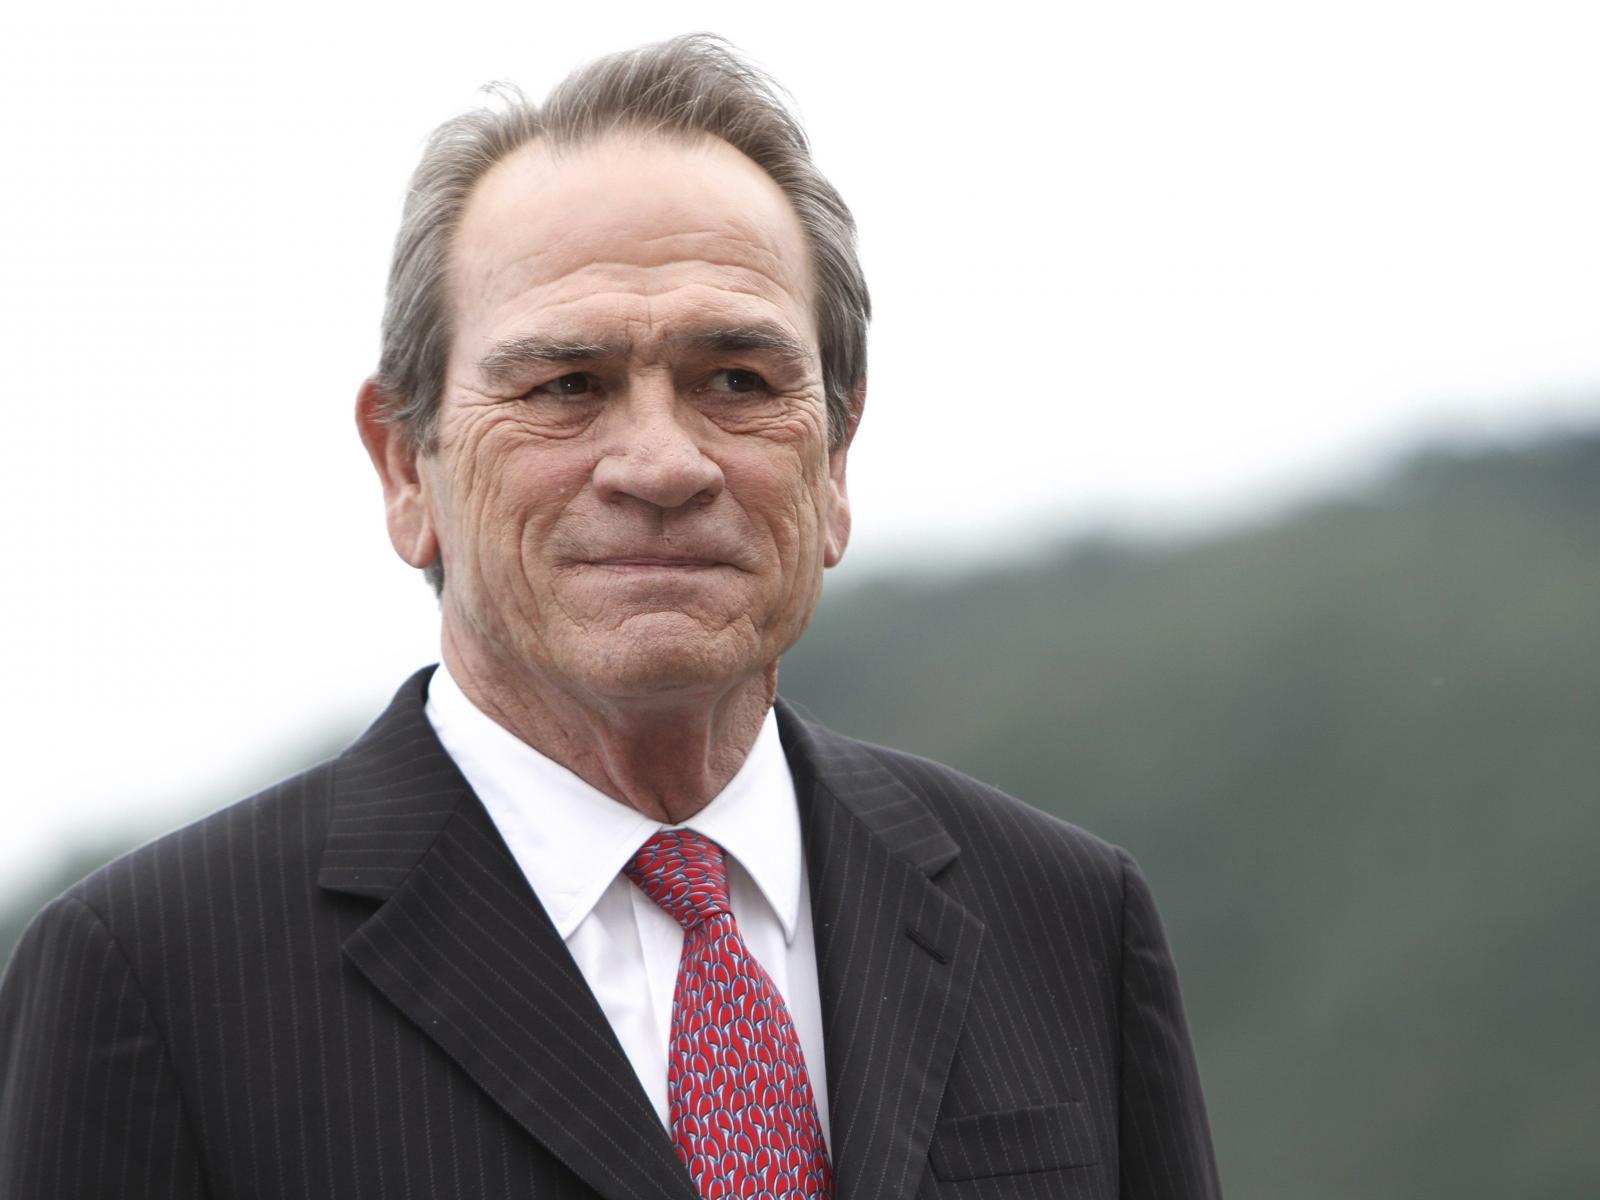 Top 15 Tommy Lee Jones Movies You Should Have Seen By Now